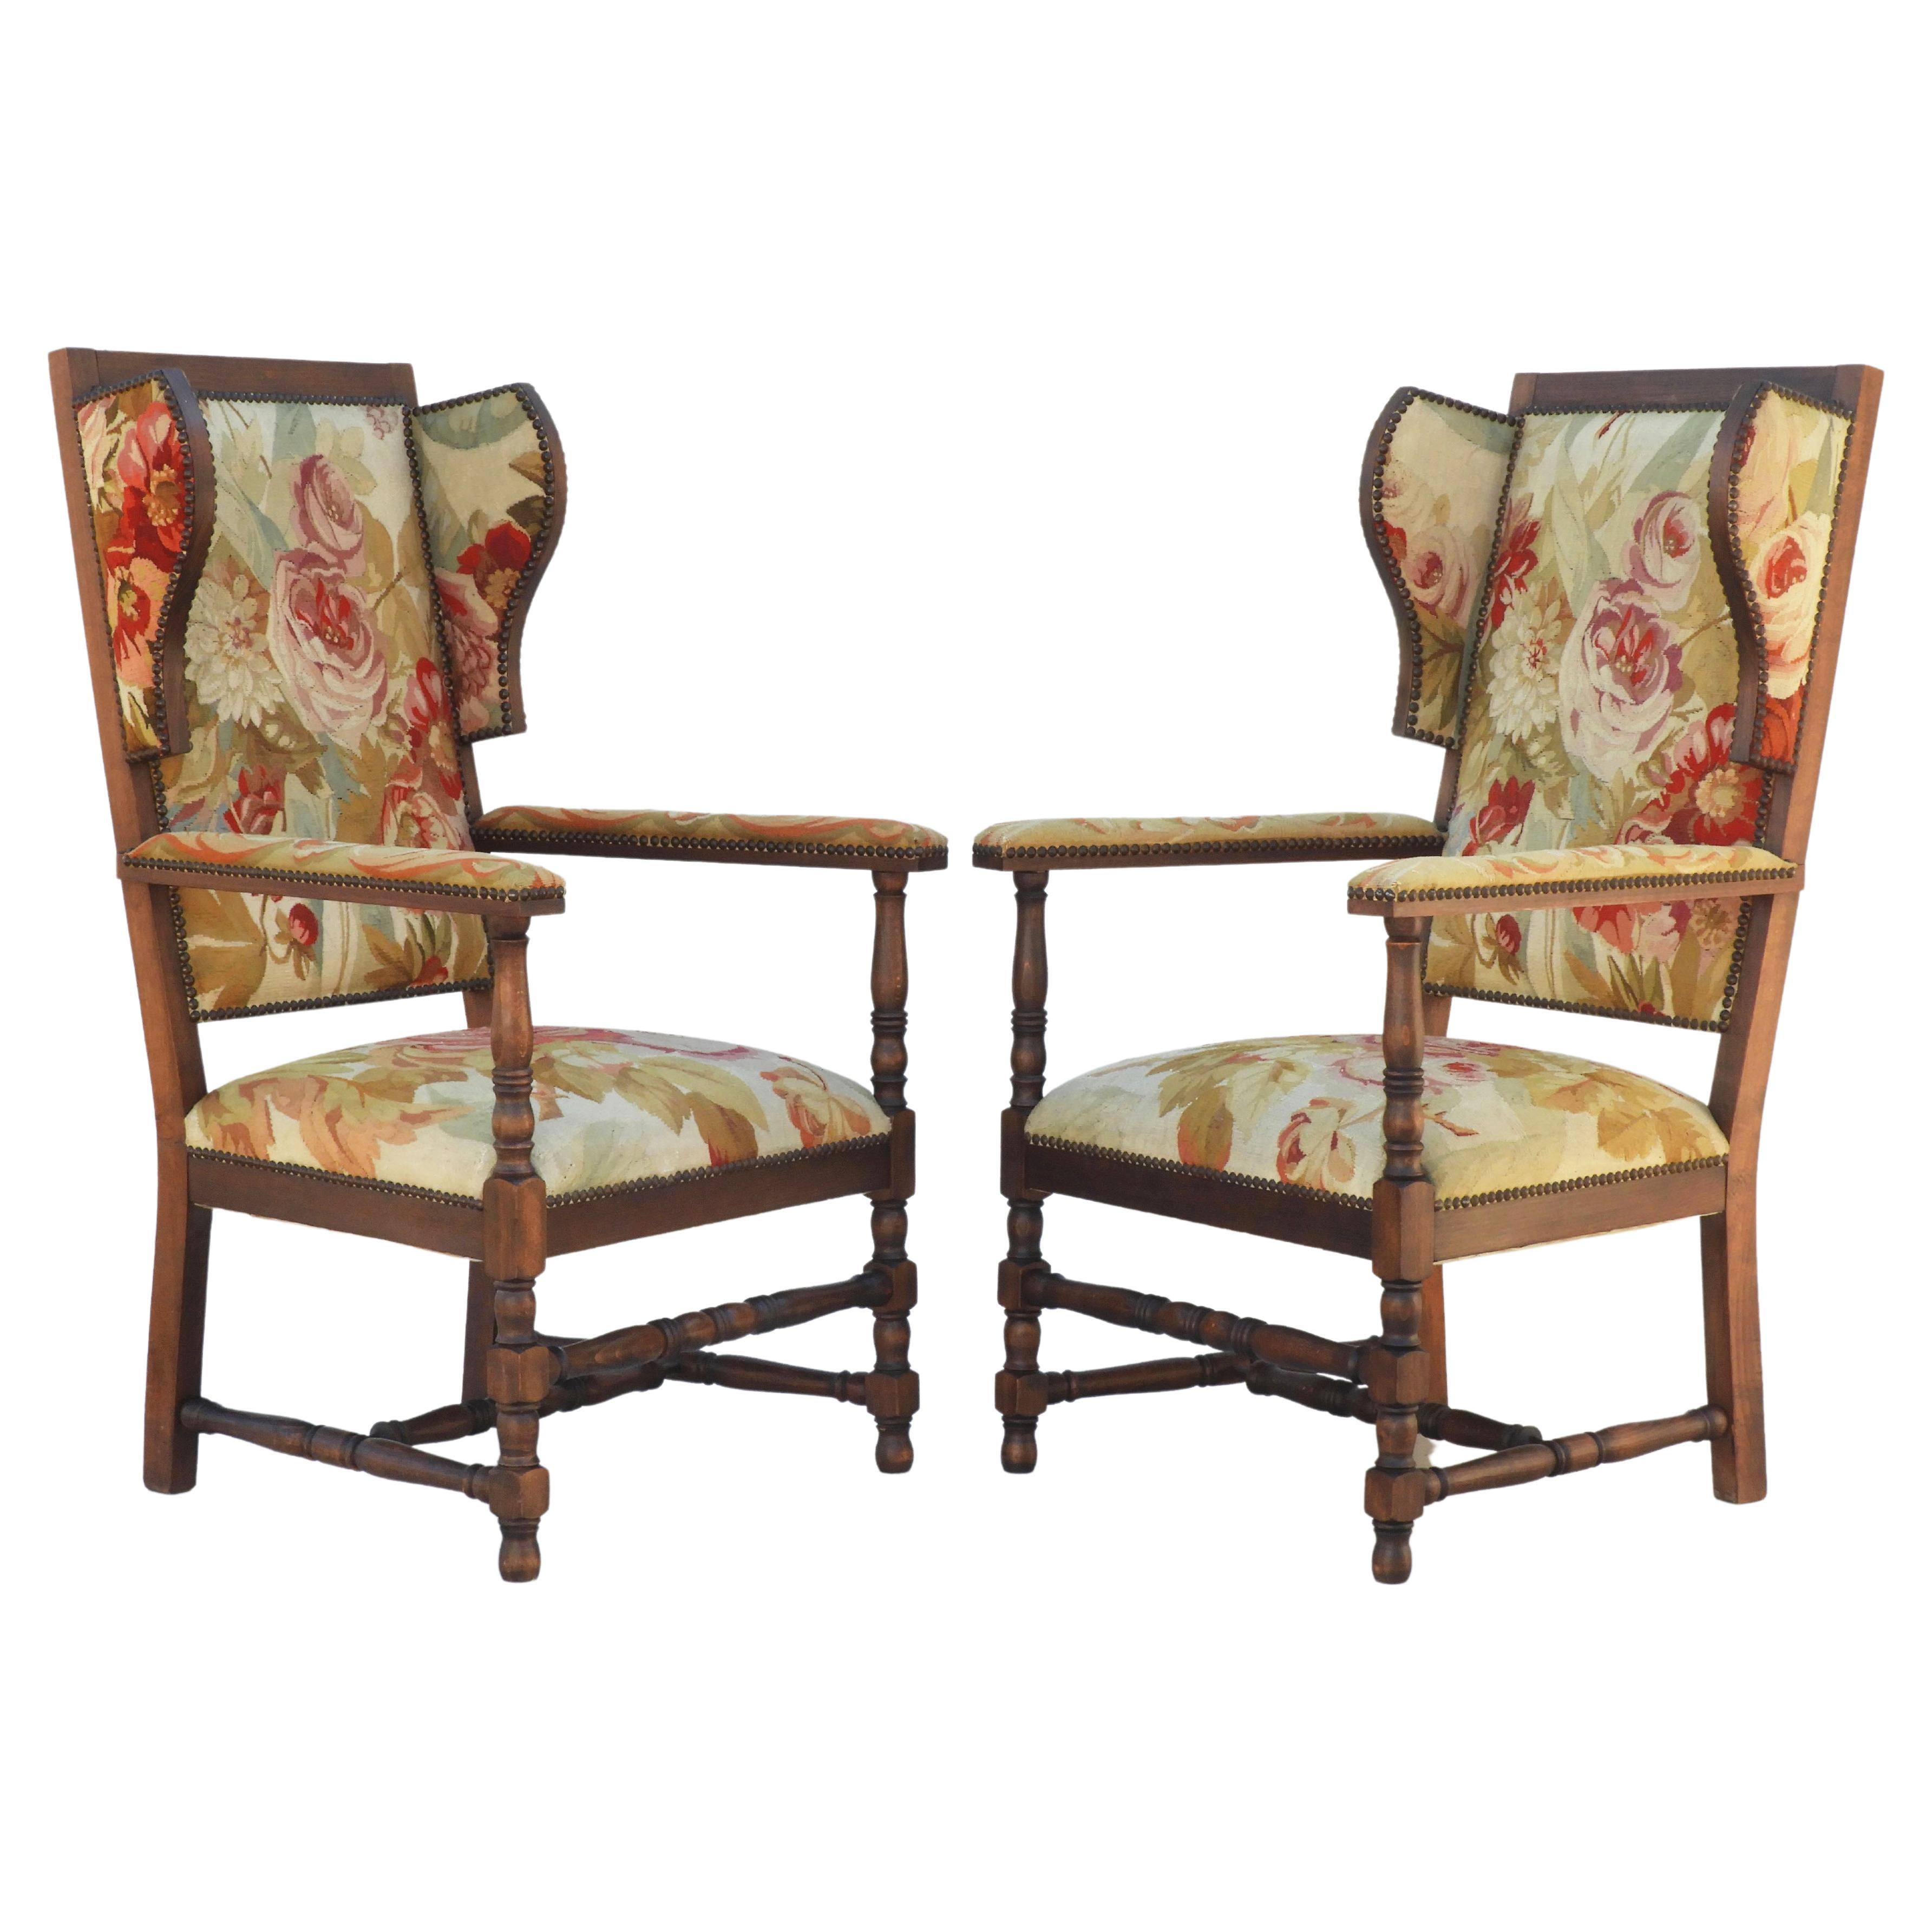 Pair of French Provincial Oak and Tapestry Wing back Armchairs For Sale